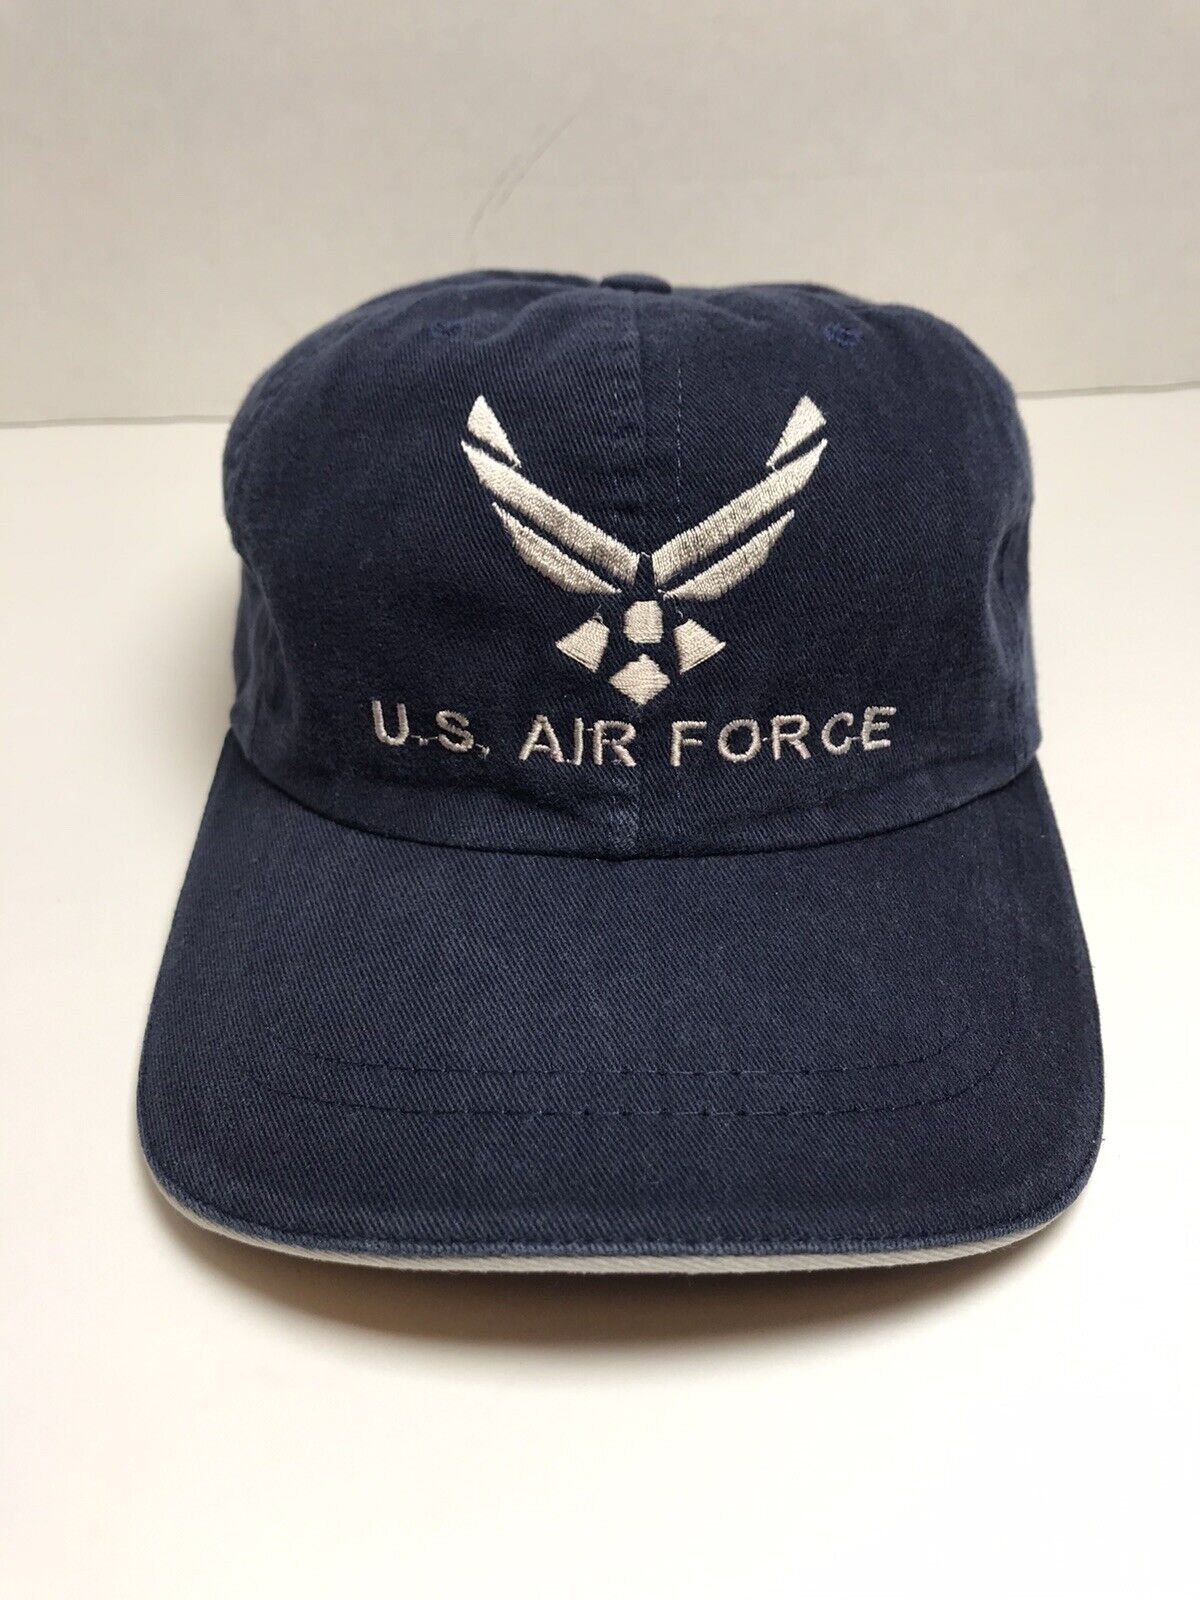 U.S. Air Force CAP Hat Adjustable Made in USA Blue Lightweight Clean